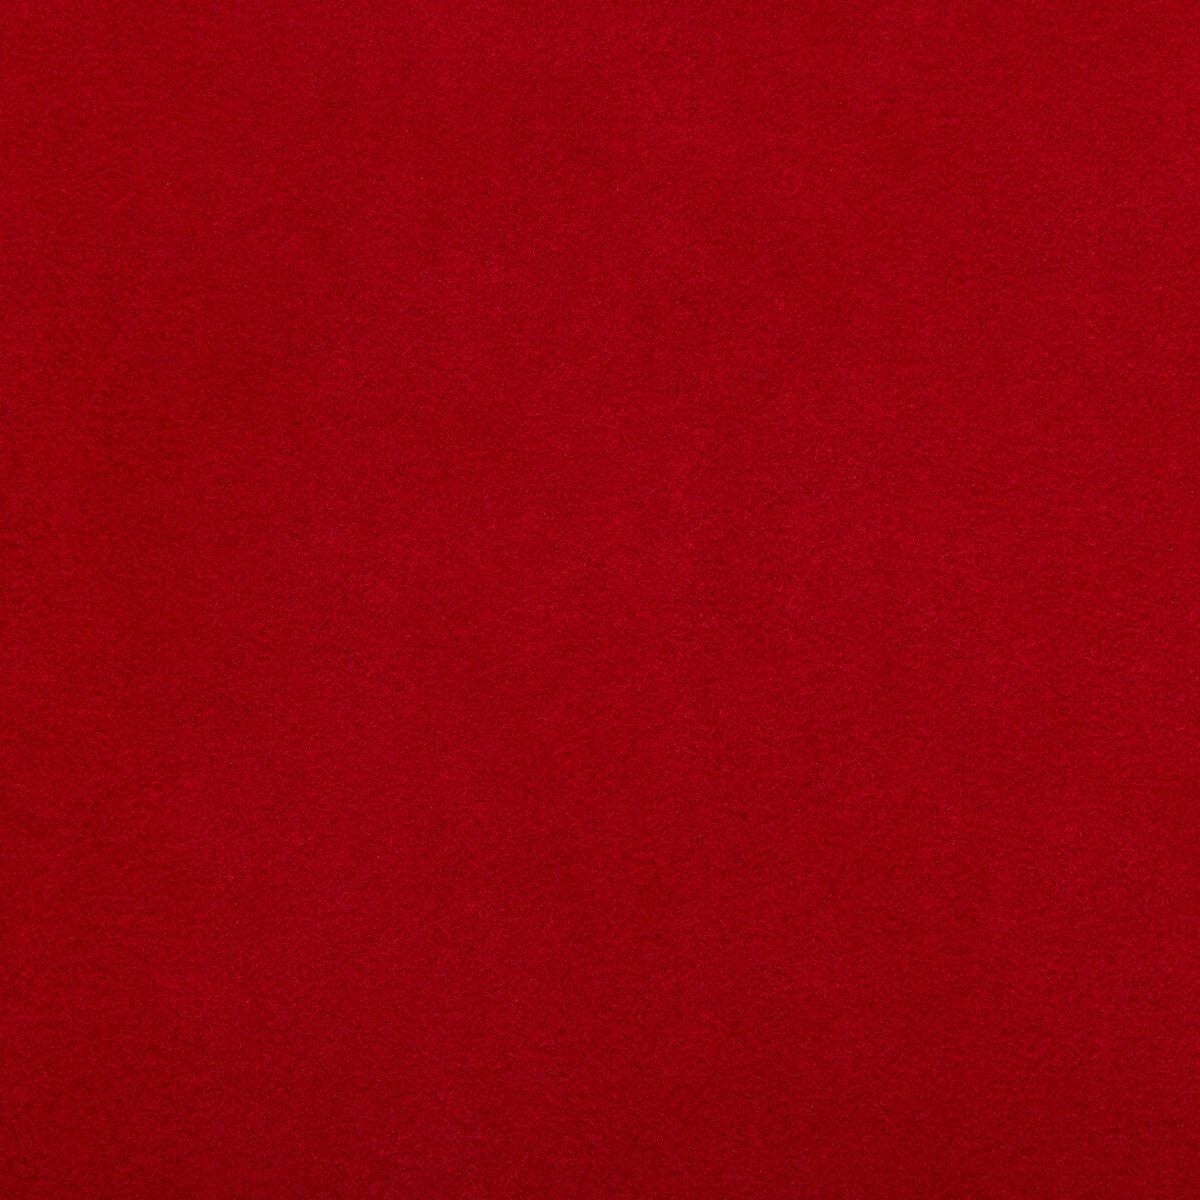 Ultimate fabric in ladybug color - pattern 960122.2.0 - by Lee Jofa in the Ultimate Suede collection